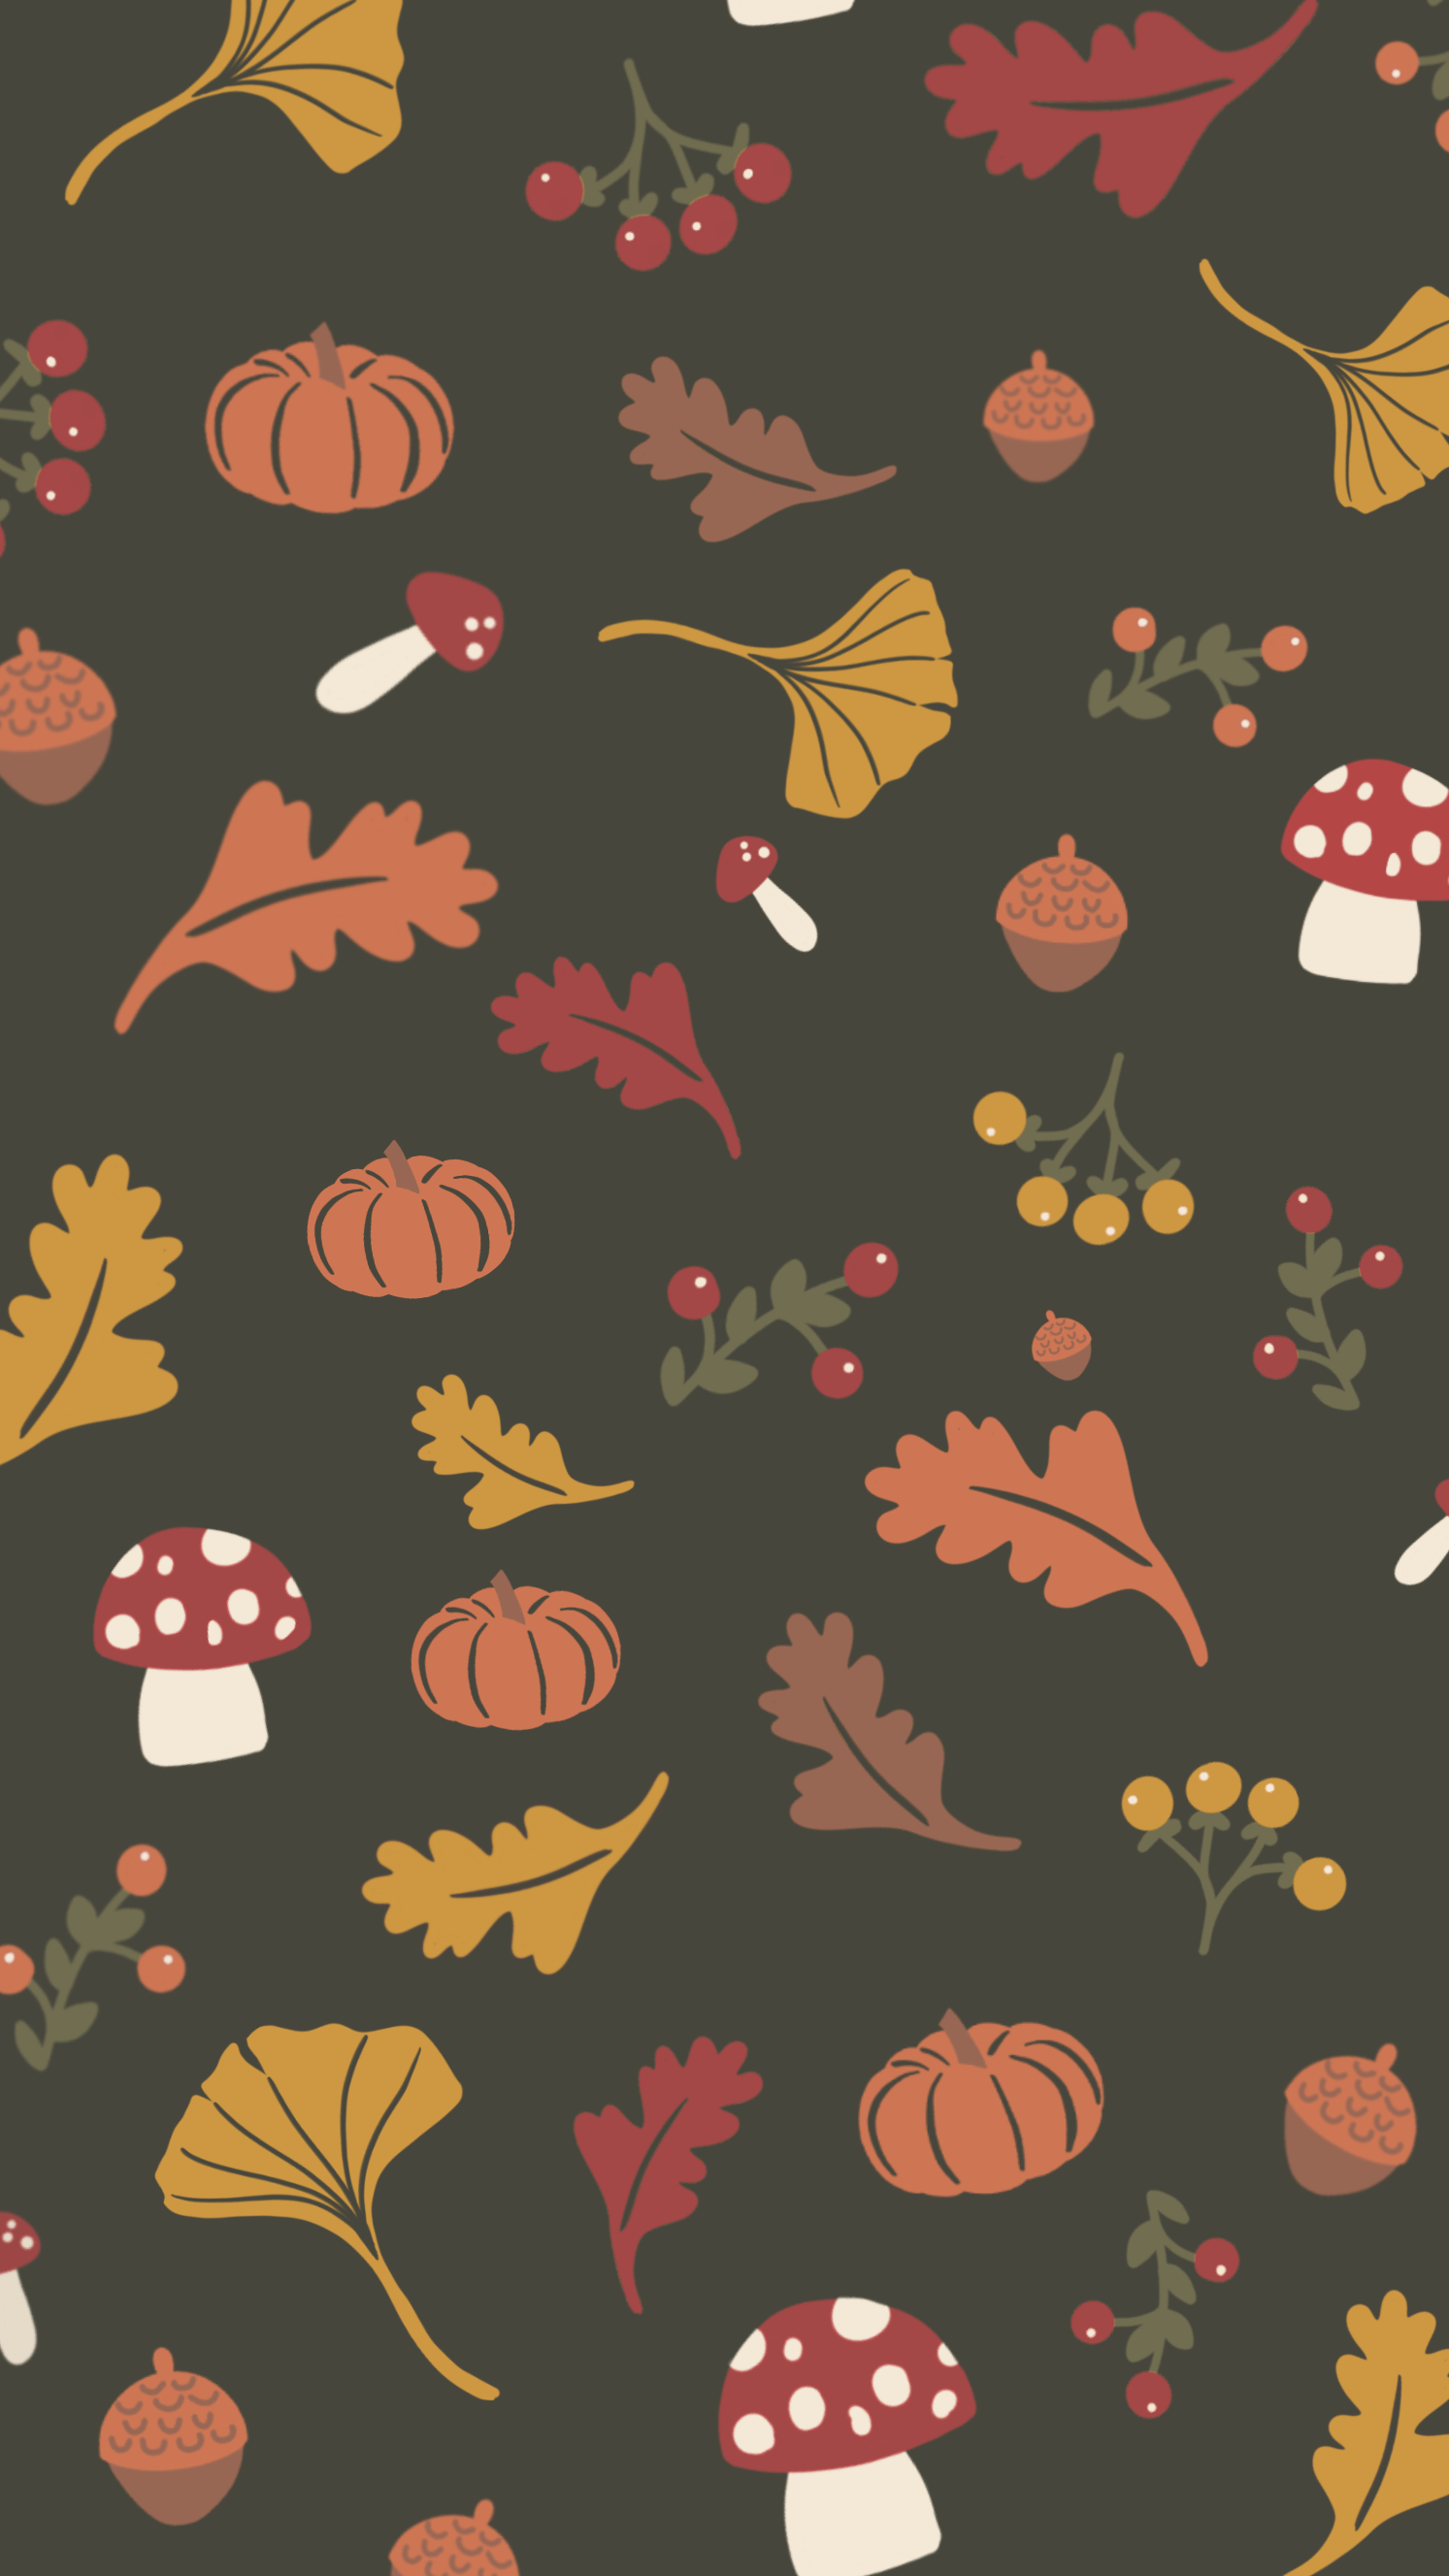 A pattern of mushrooms, leaves and acorns - Thanksgiving